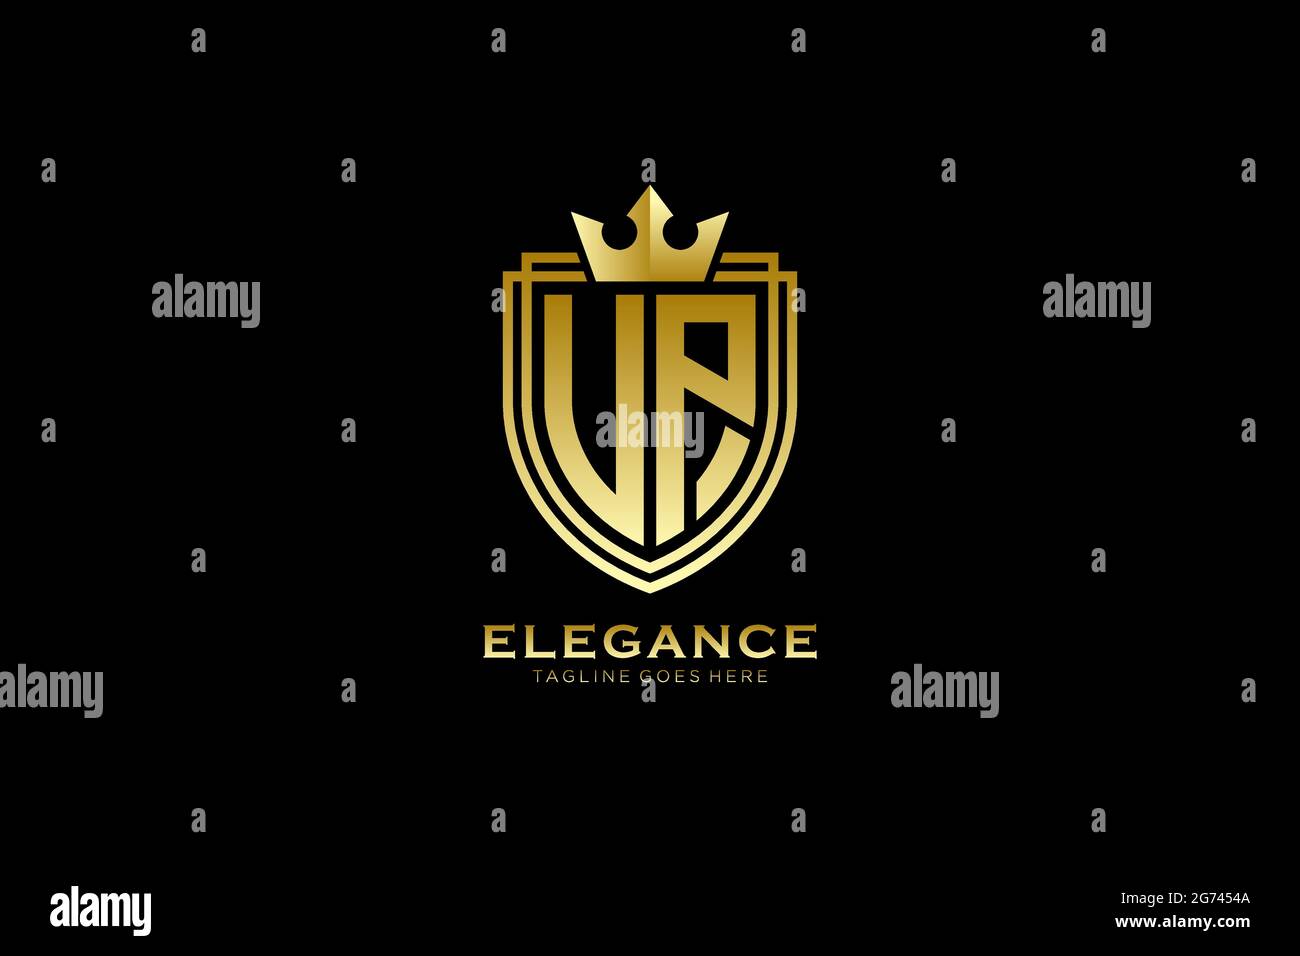 UP elegant luxury monogram logo or badge template with scrolls and royal crown - perfect for luxurious branding projects Stock Vector